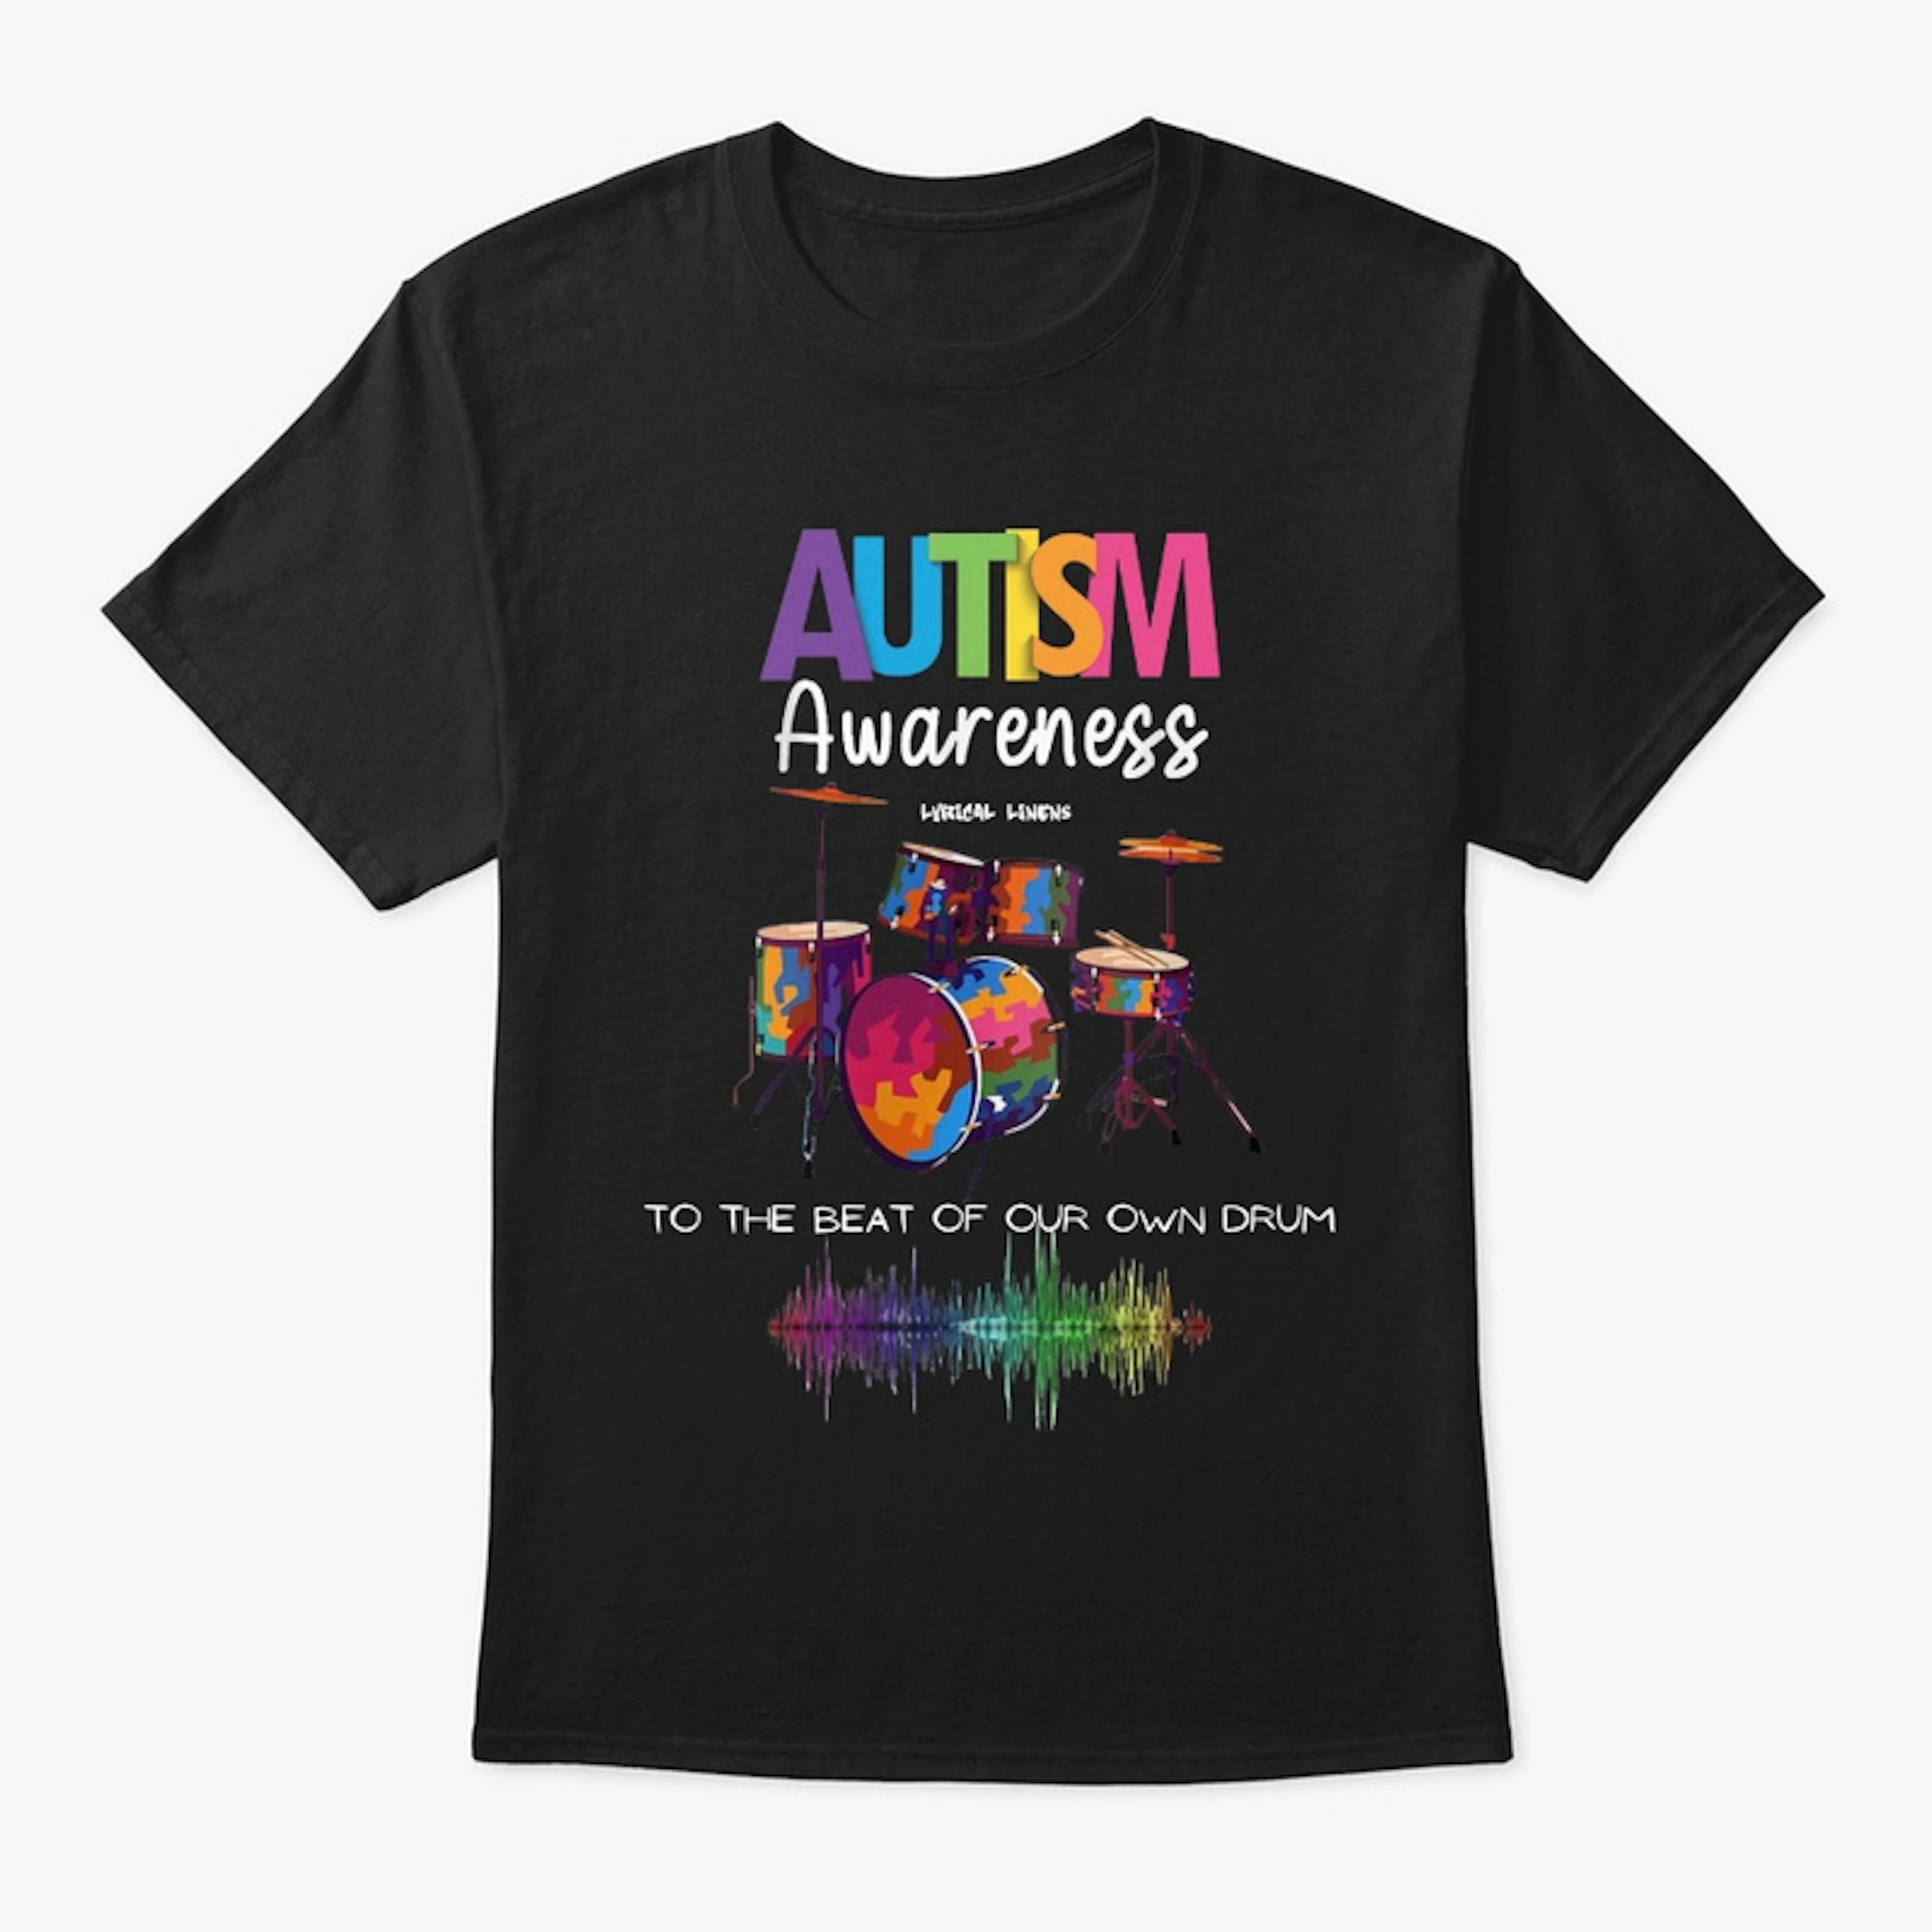 Autism Awareness (Beat Of Our Own Drum)